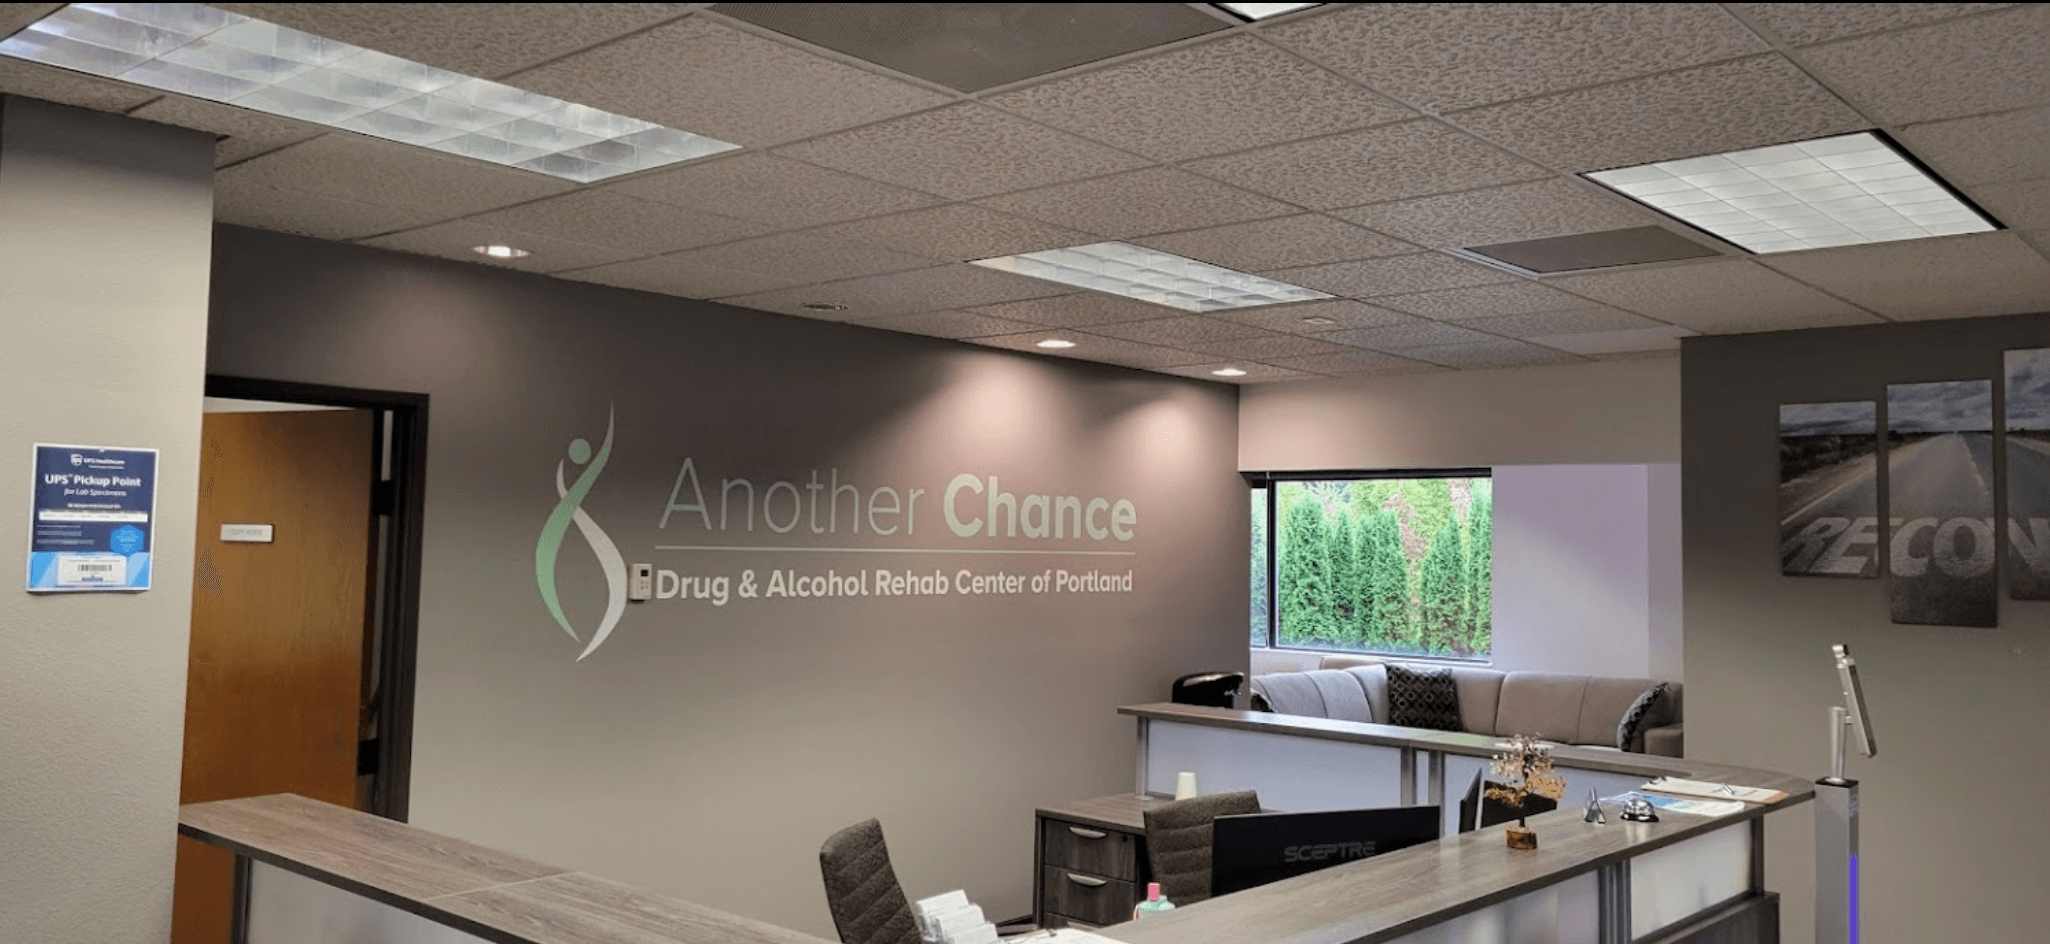 Another Chance Drug &#038; Alcohol Rehab Center of Portland